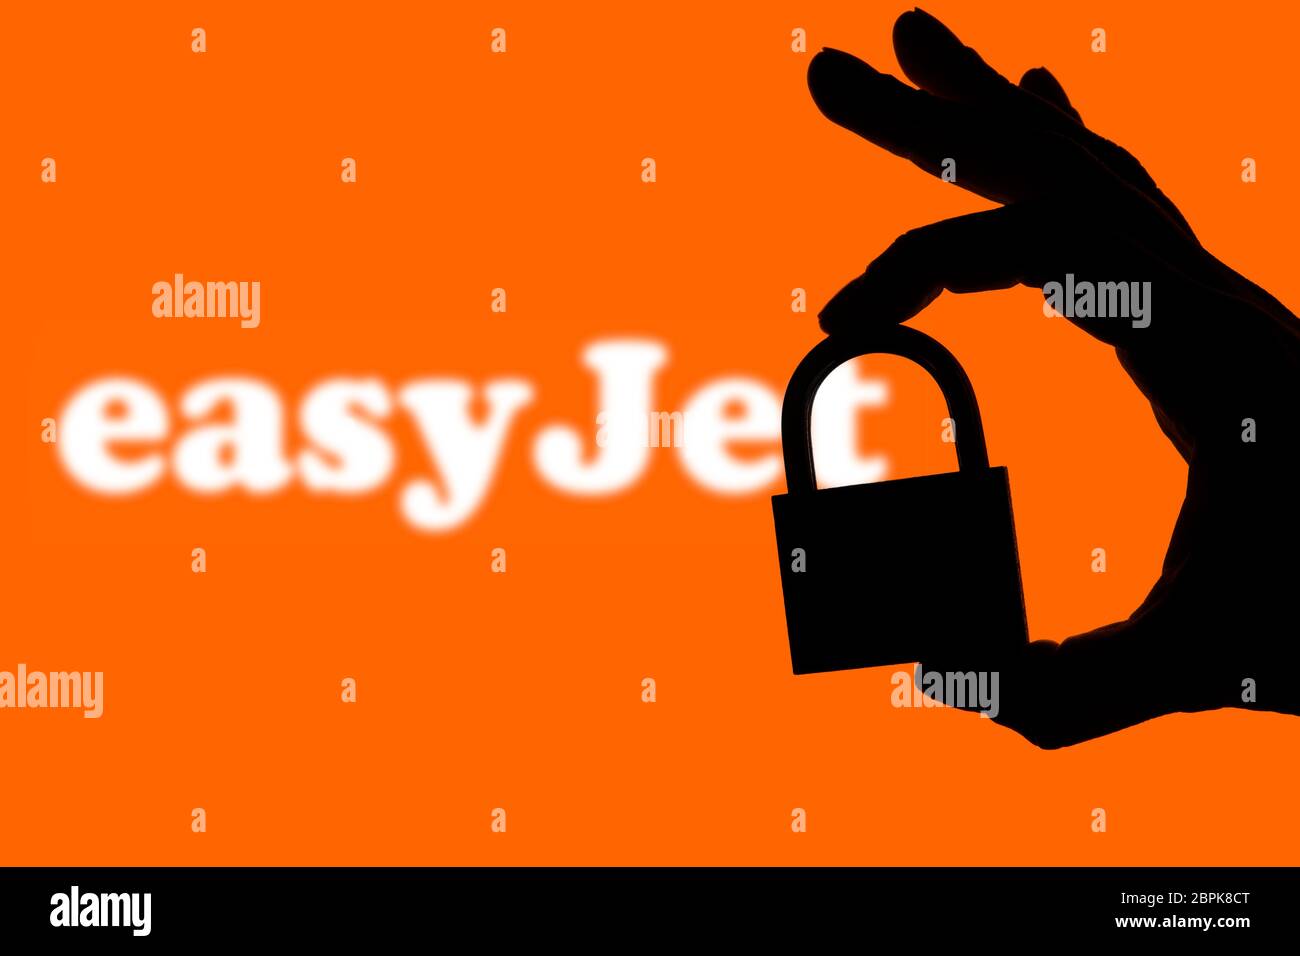 LONDON, UK - April 19th 2020: Easyjet airline company logo with security padlock Stock Photo